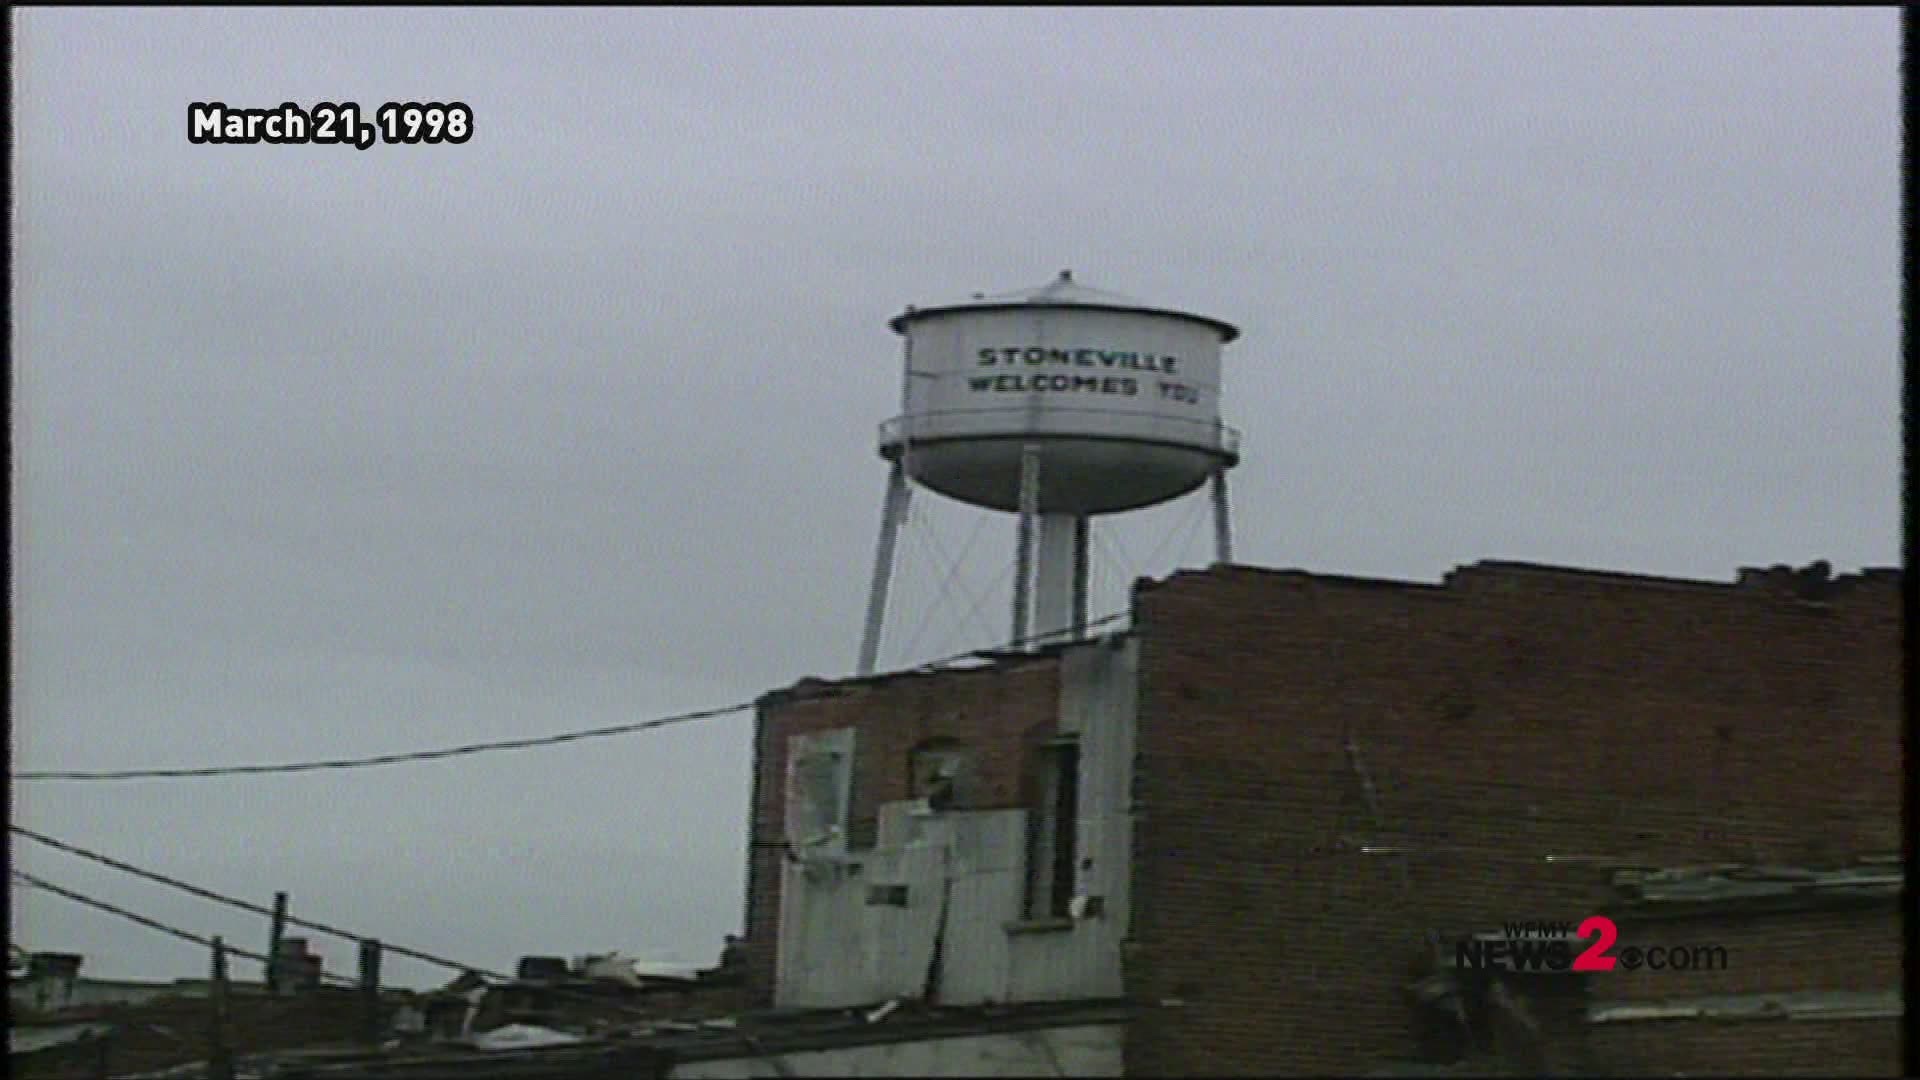 On March 20, 1998 a tornado slammed into the small town of Stoneville killing at two people, injuring dozens others and caused heavy damage to the central business district. Nearby towns Madison and Mayodan were also hit hard.